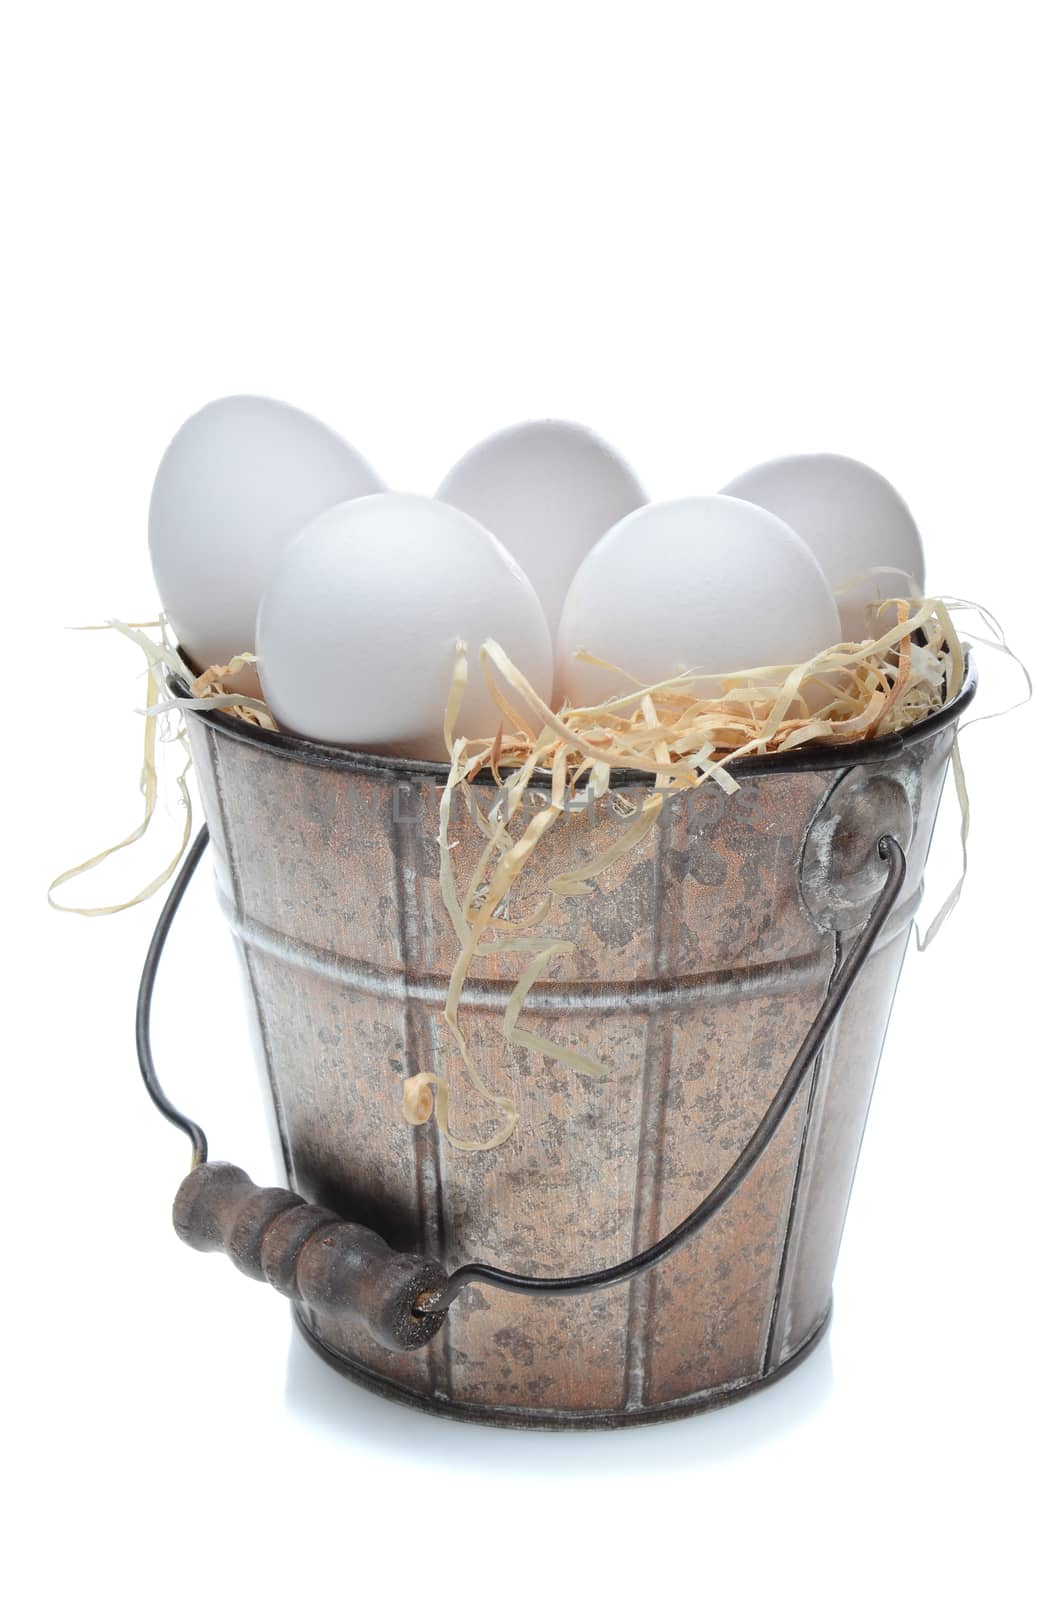 Fresh chicken eggs in an old fashioned tin bucket over a white background with slight reflection. Bucket is filled with straw.